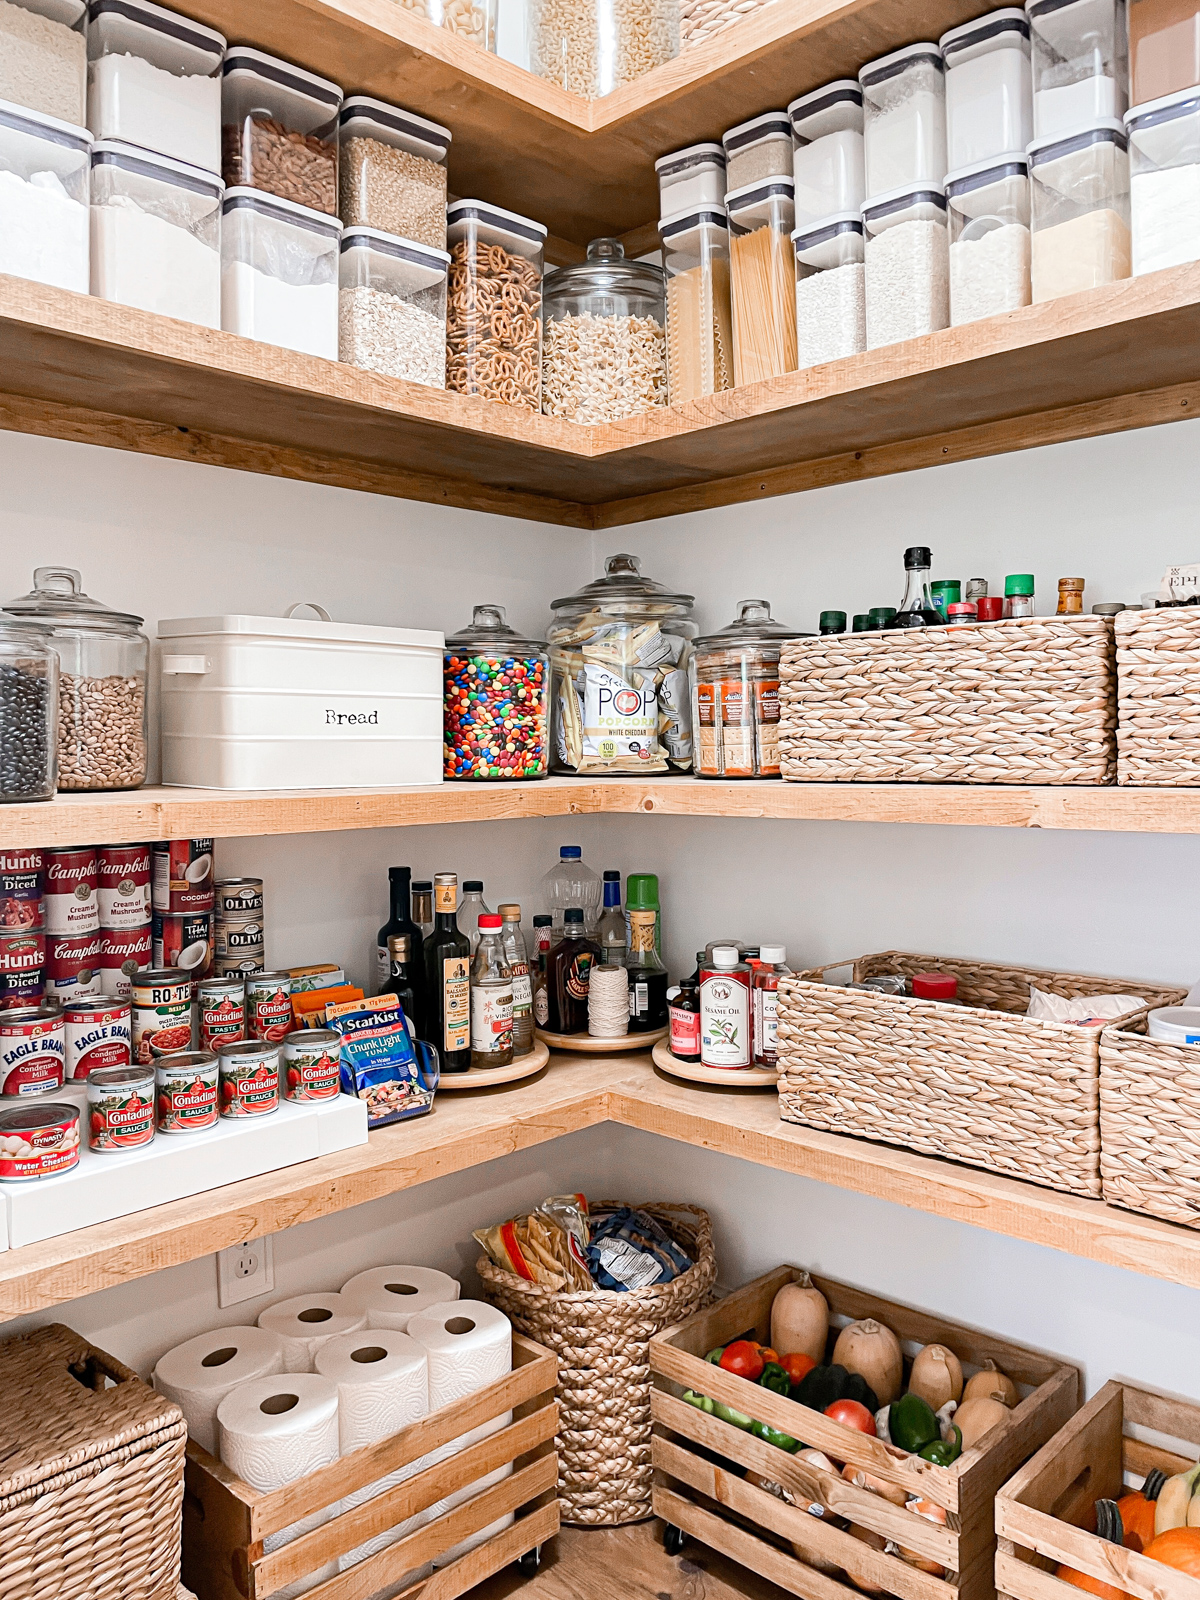 Pantry storage with crates and baskets